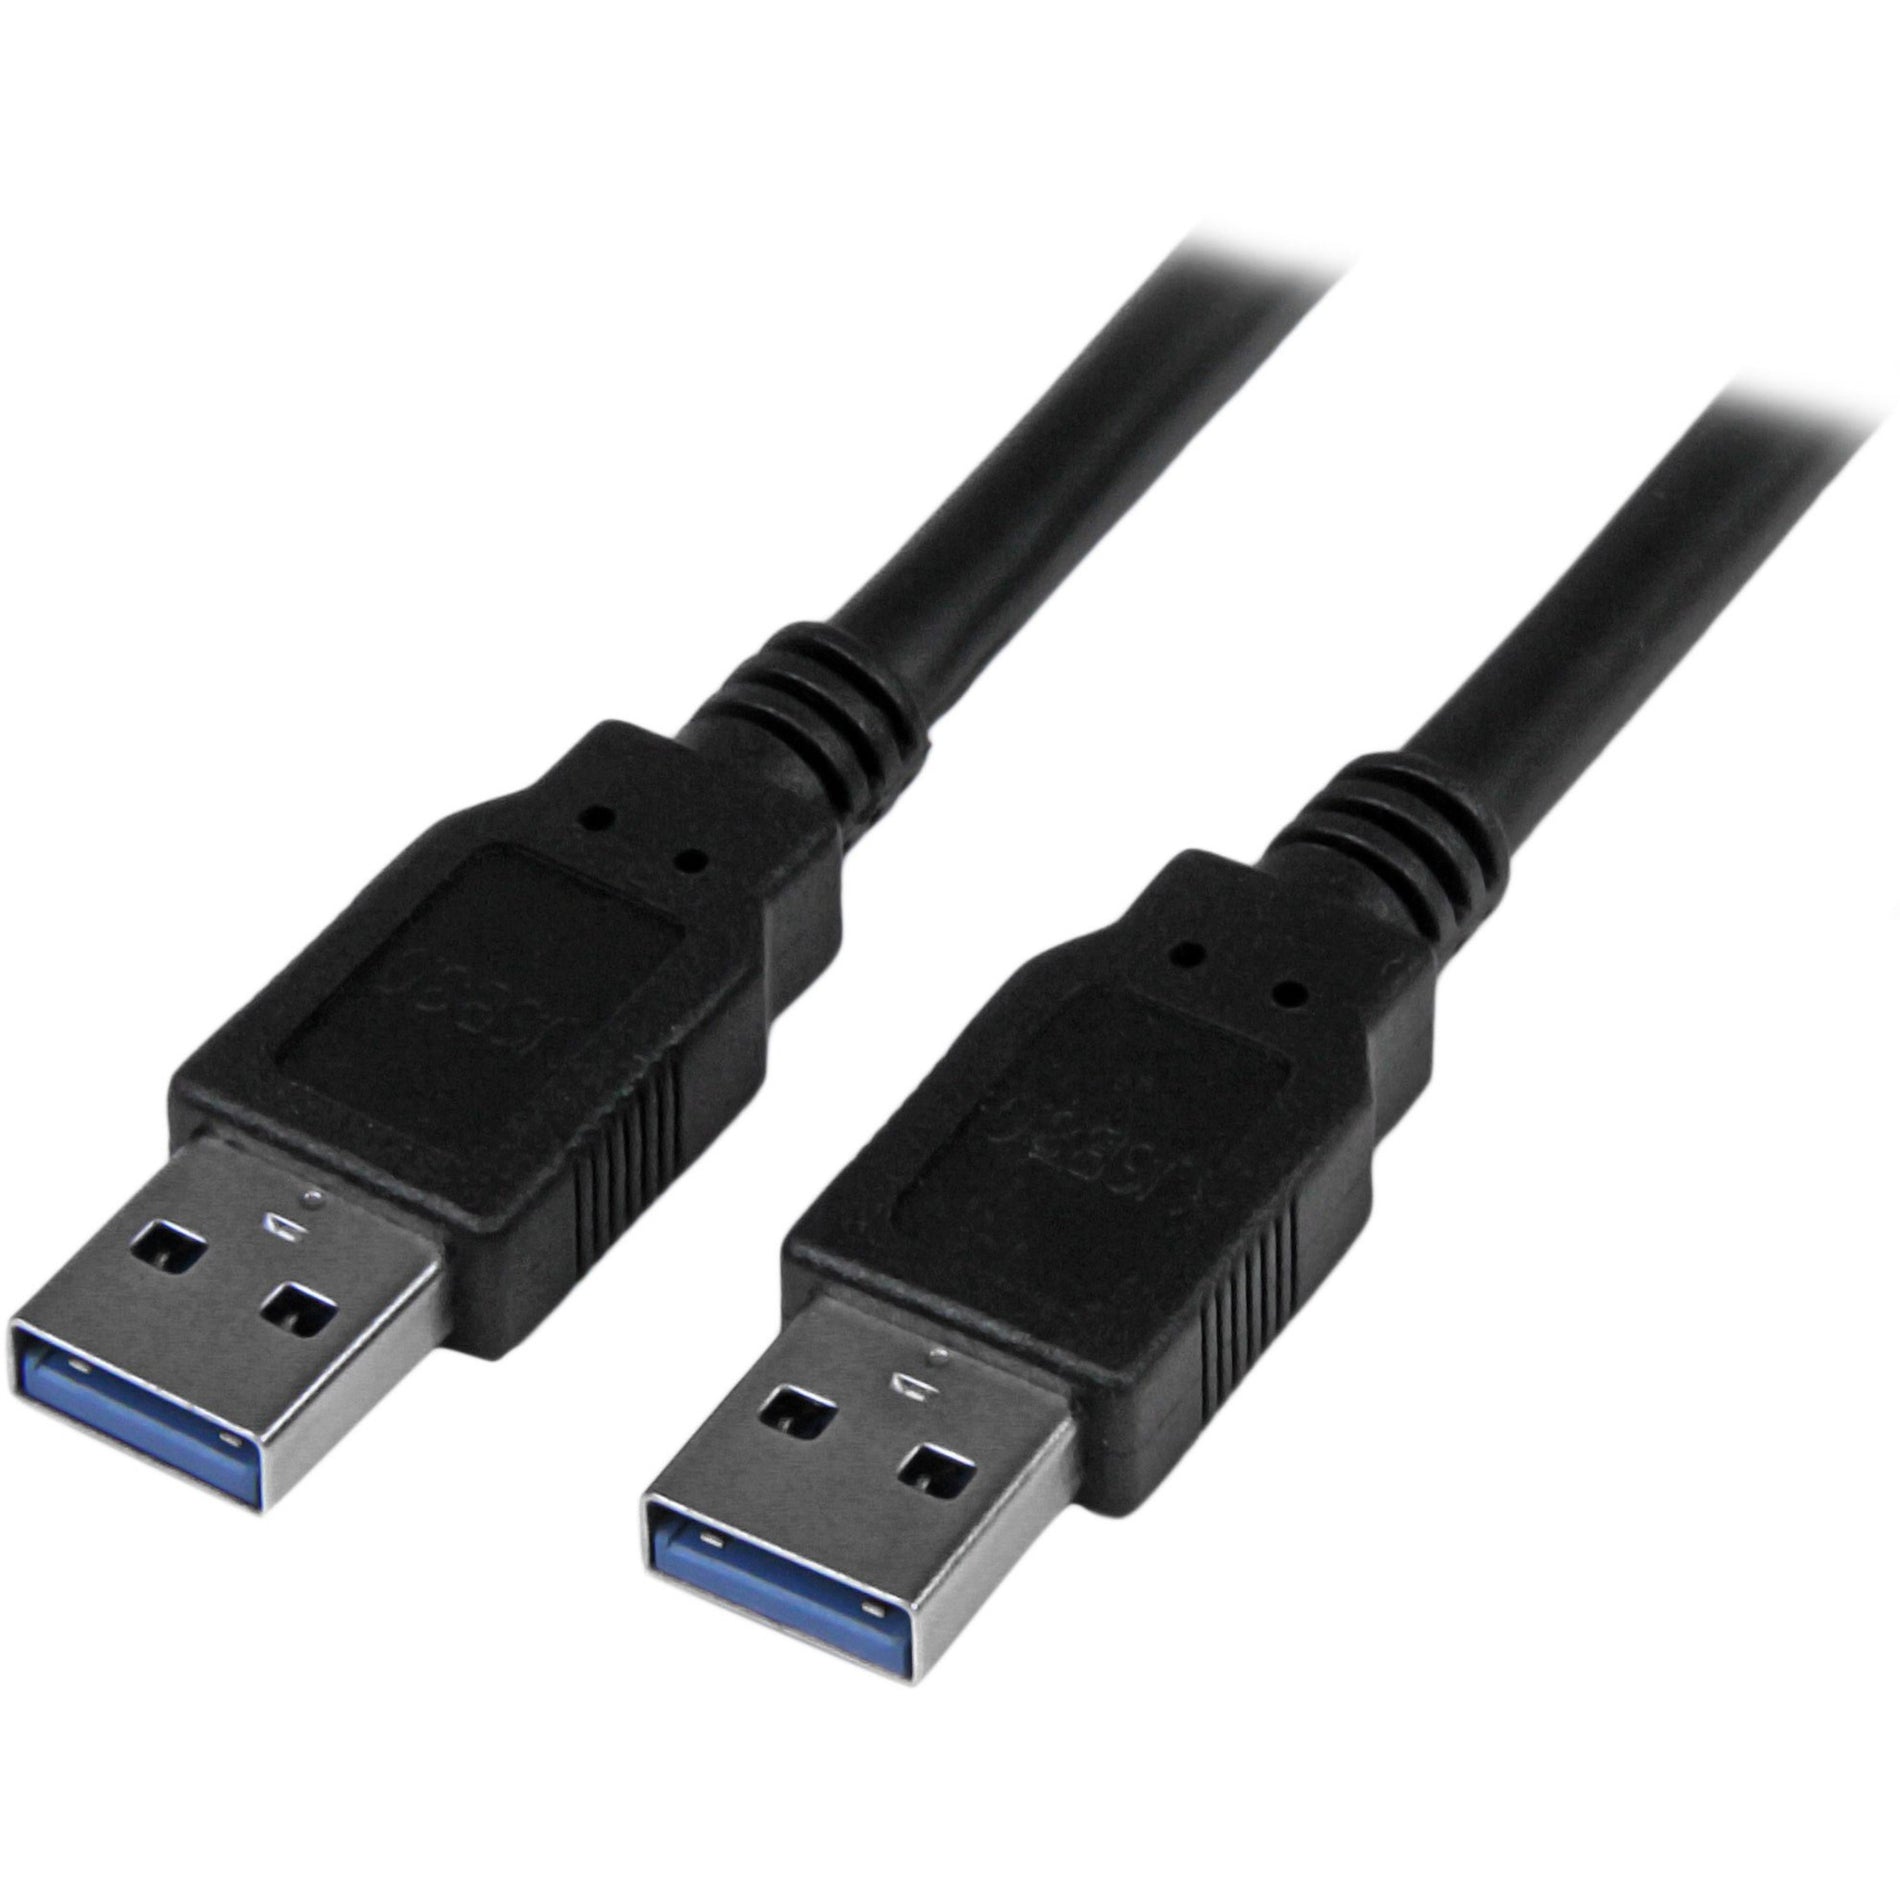 StarTech.com USB3SAA6BK 6 ft Black SuperSpeed USB 3.0 Cable A to A - M/M, High-Speed Data Transfer, EMI Protection, Lifetime Warranty